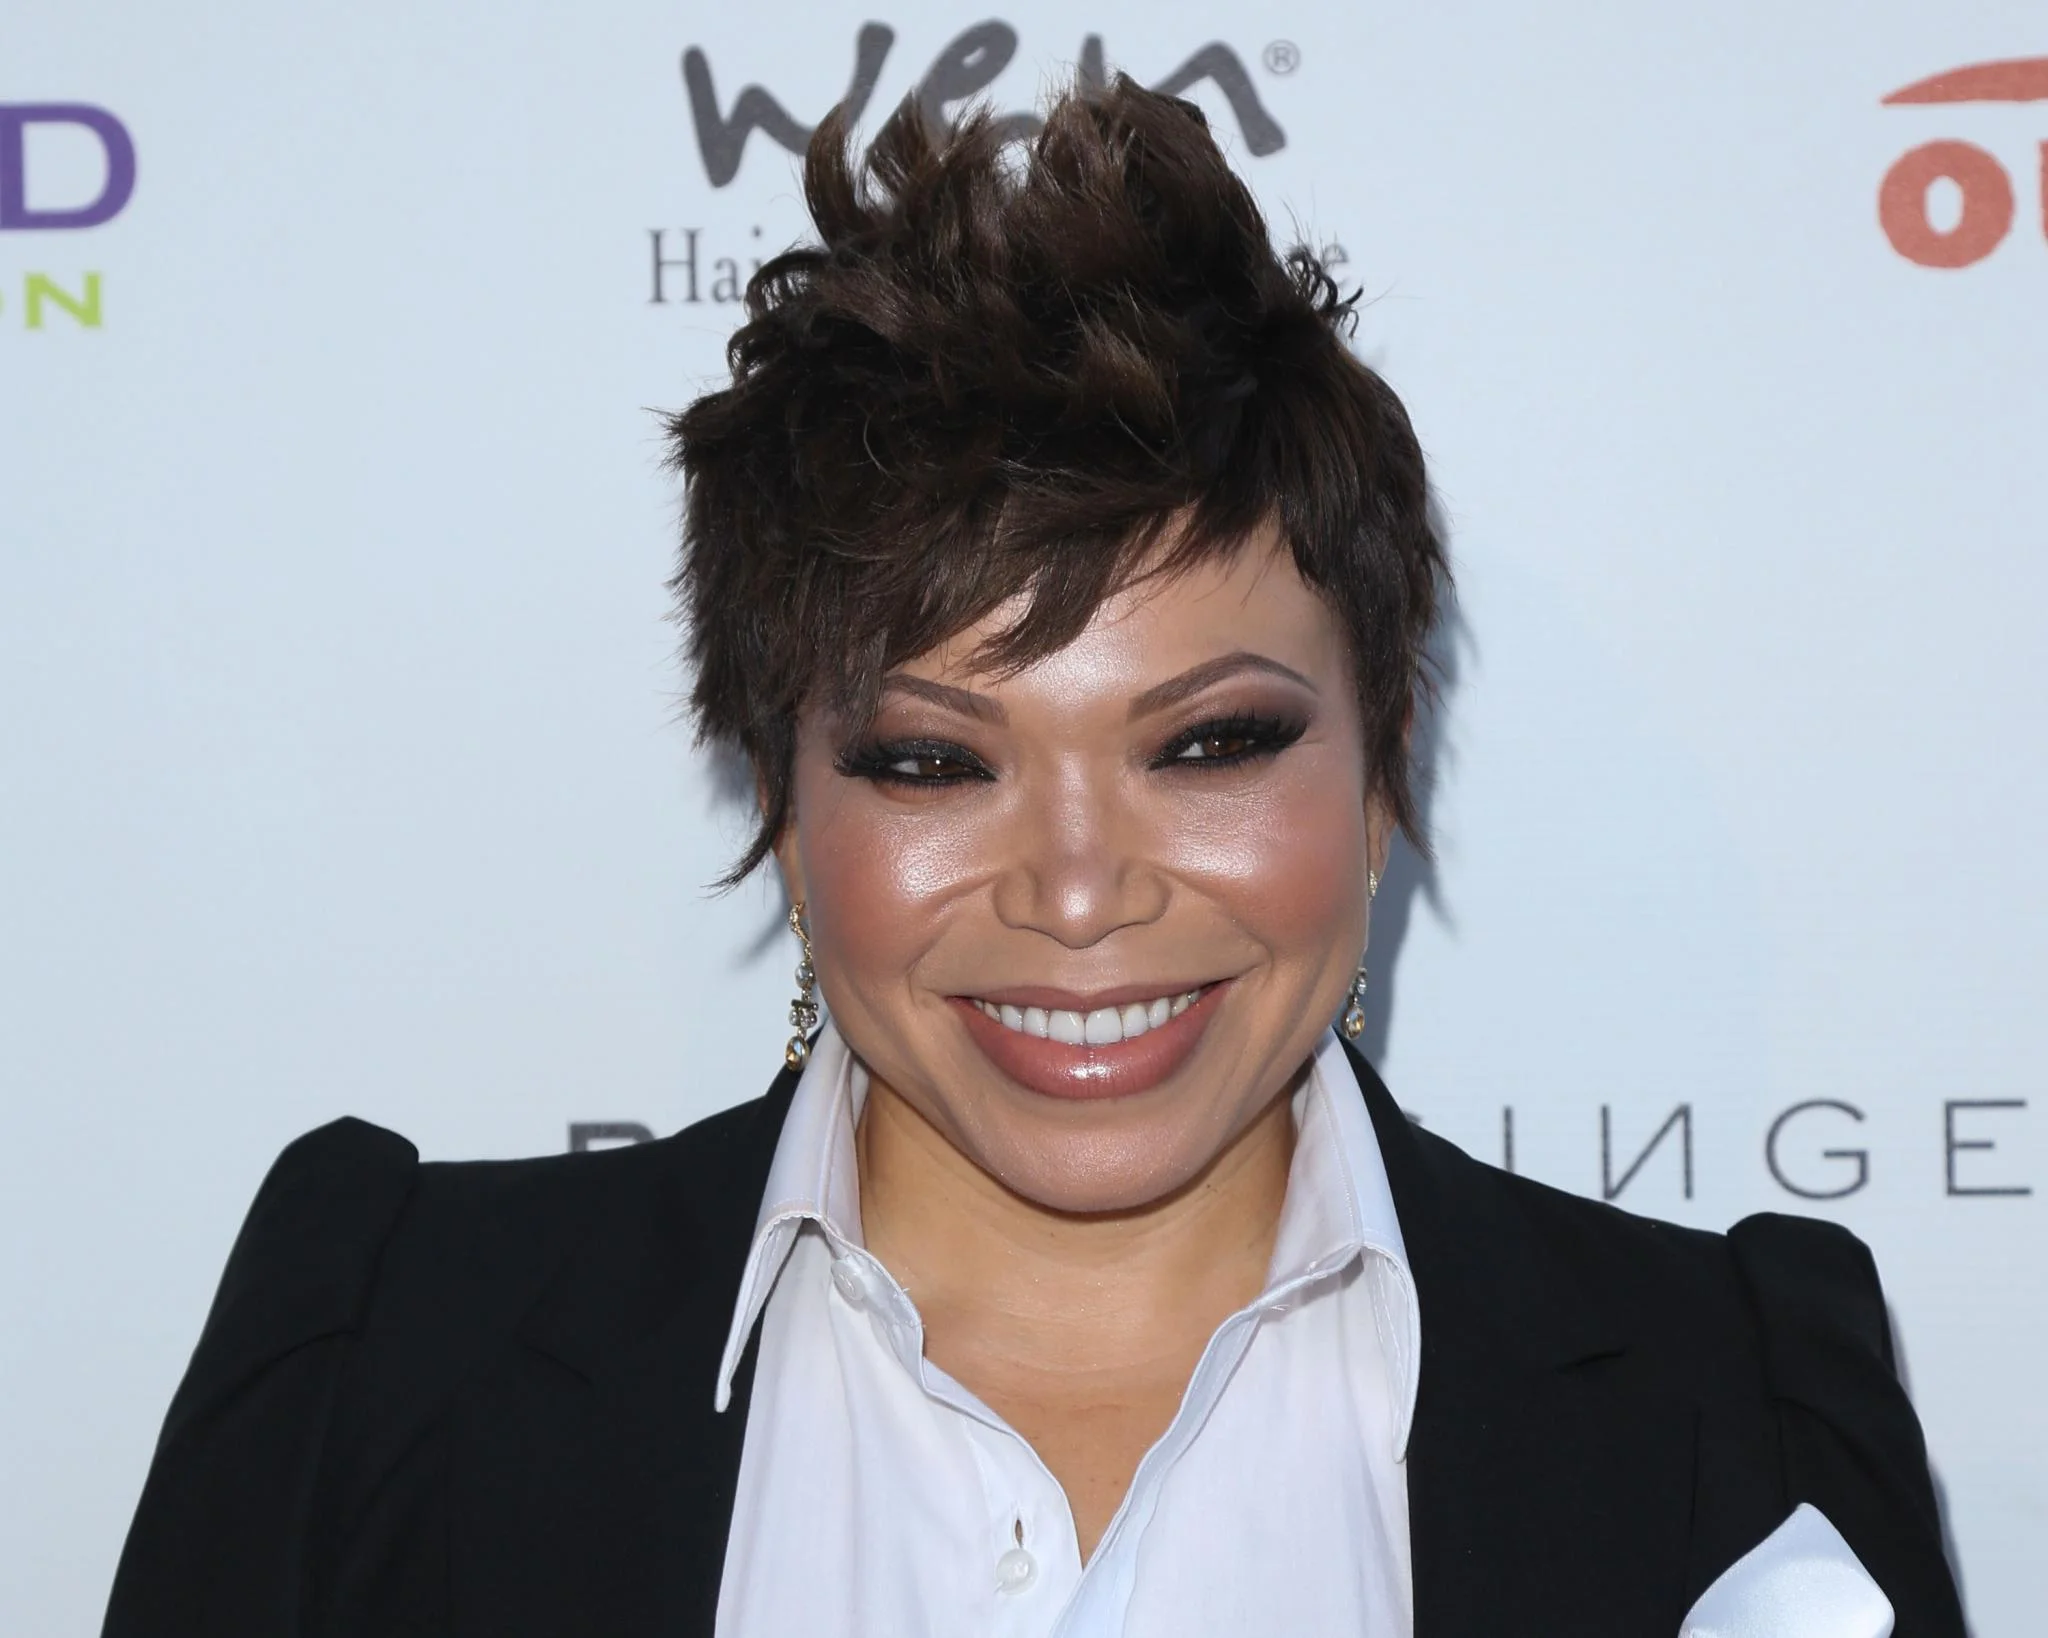 What did Tisha Campbell achieve in her career